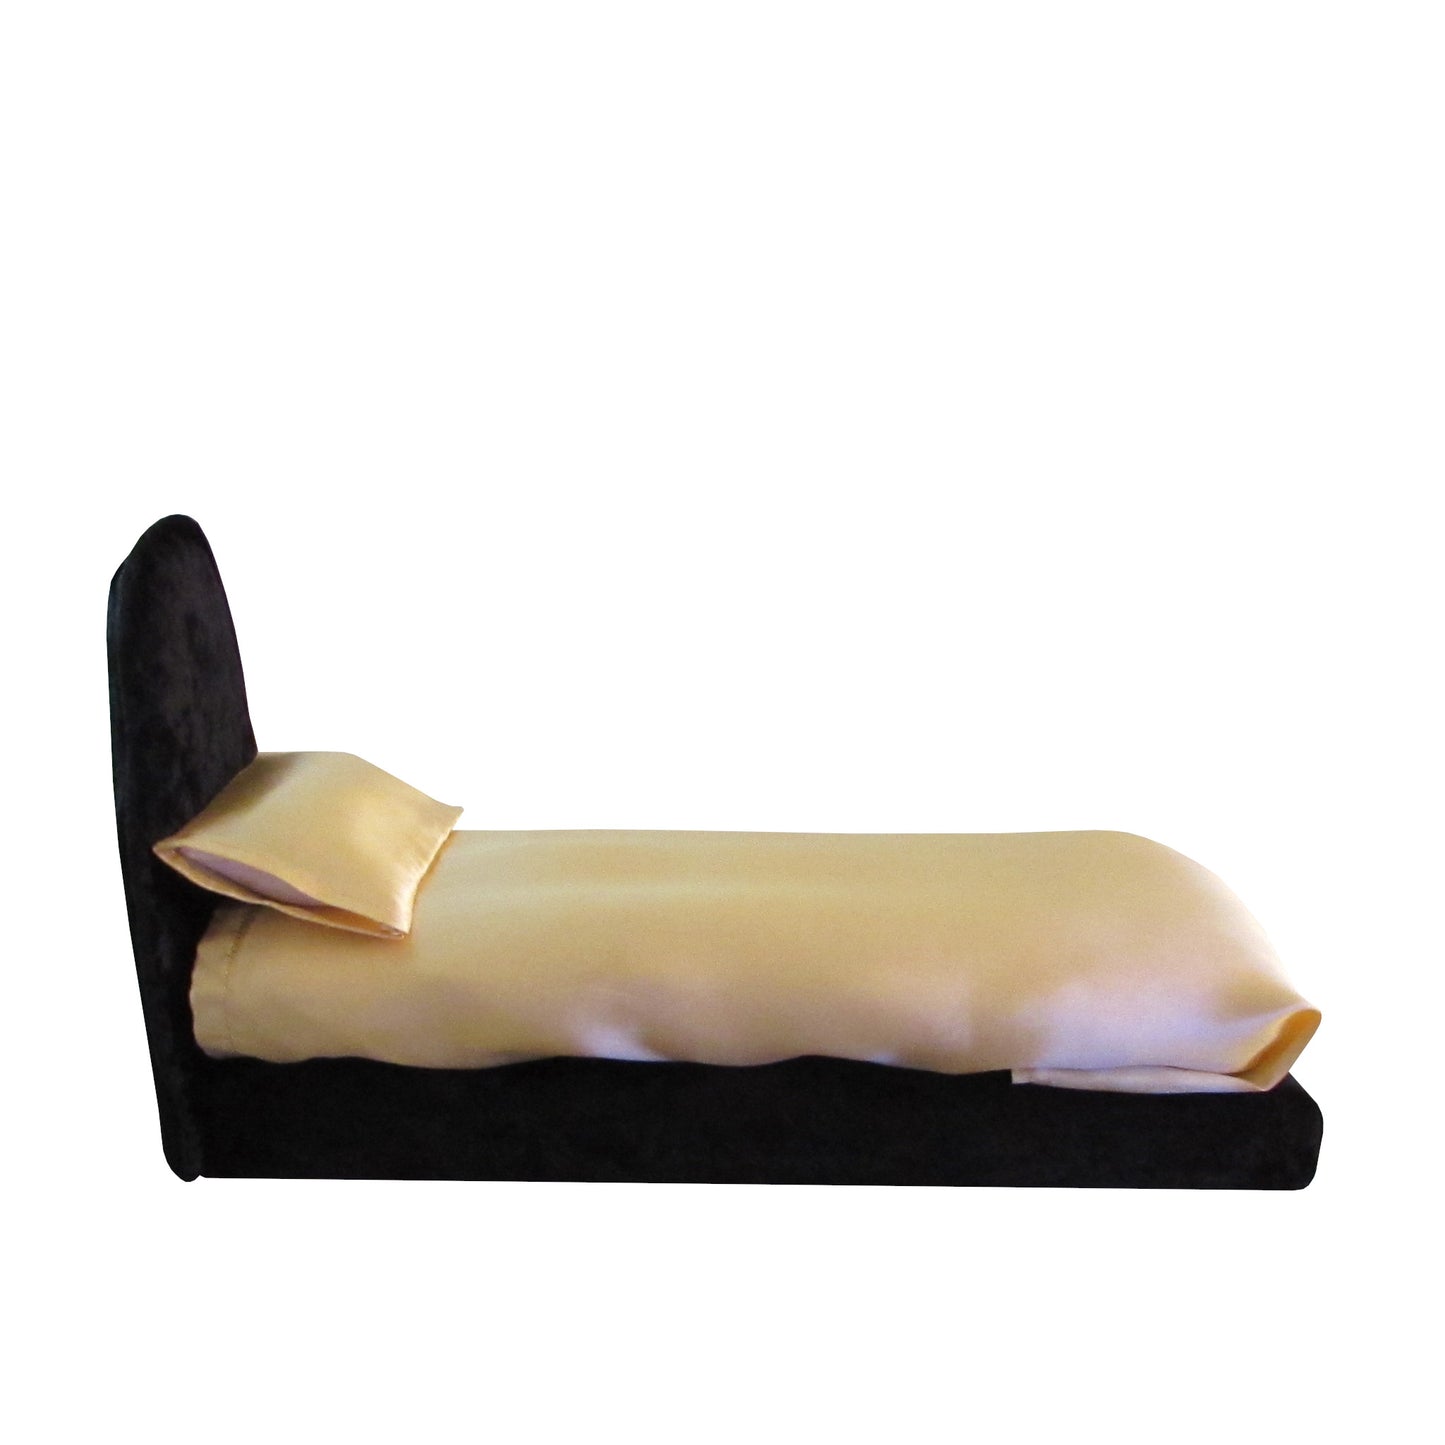 Gold Satin Fitted, Flat Sheet, and Pillowcase with Black Crushed Velvet Doll Bed for 11.5-inch and 12-inch dolls Side view